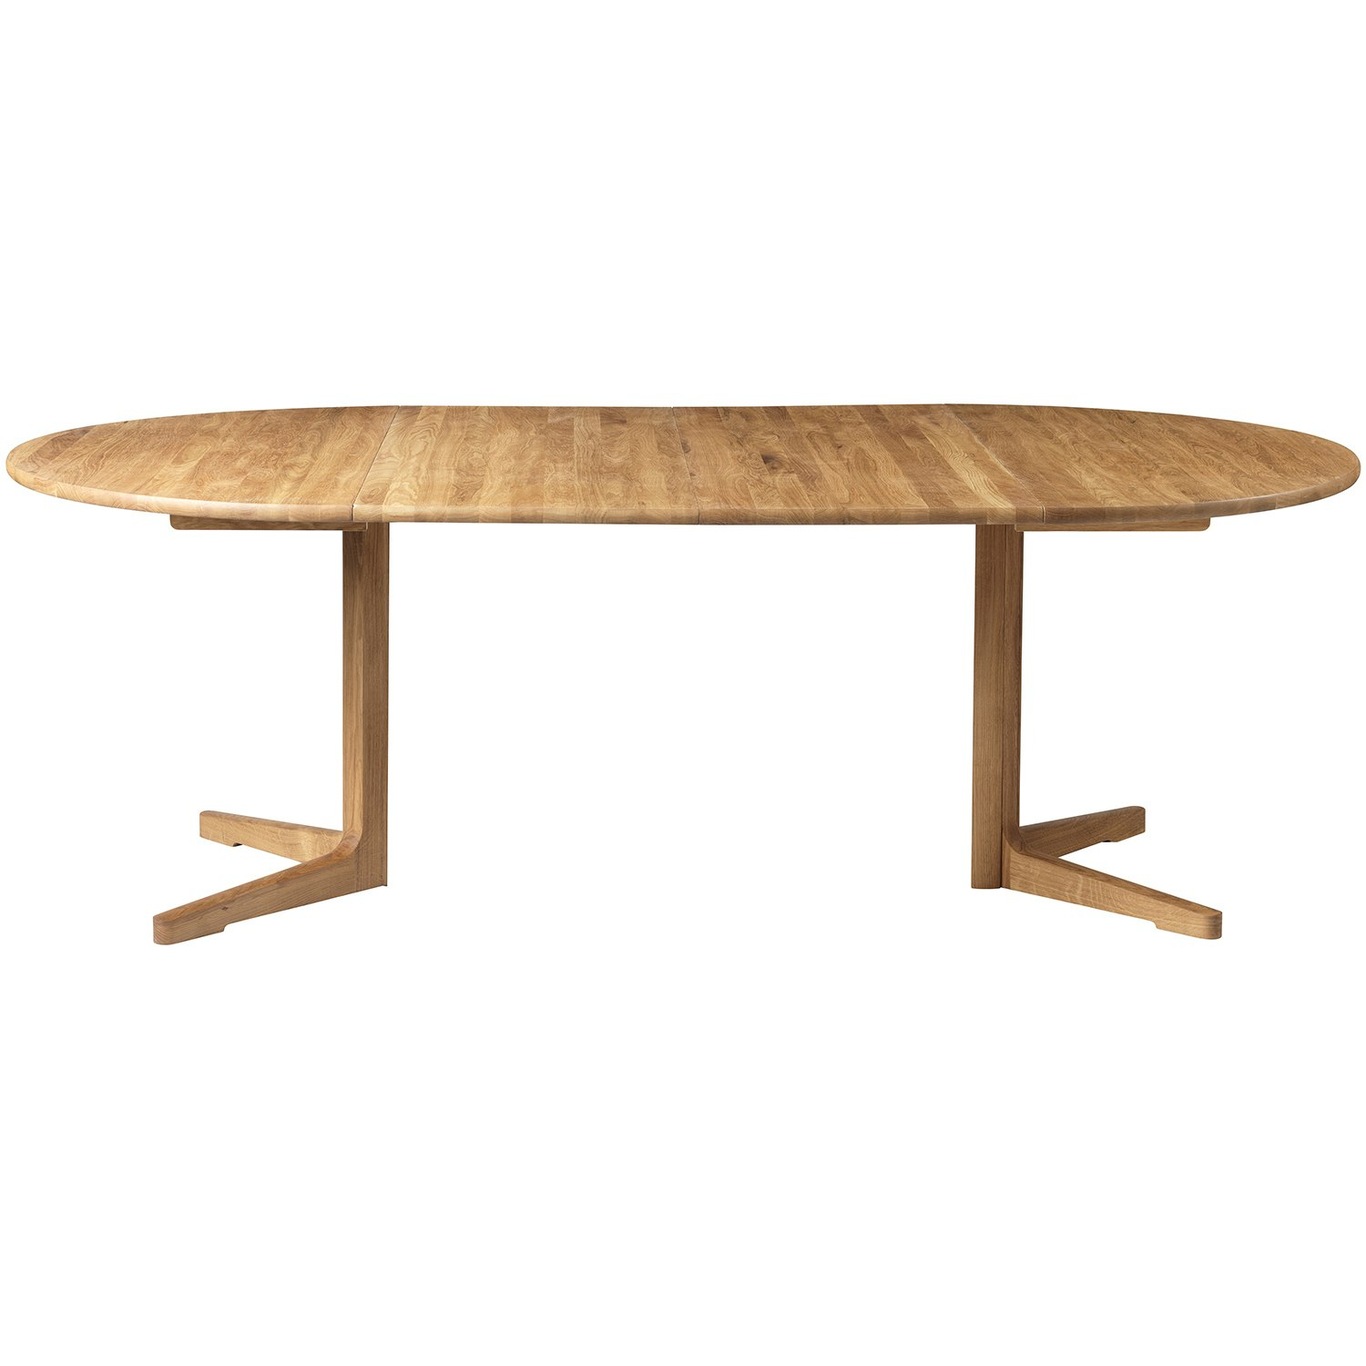 C69E Ry Dining Table Oak With 2 Extension Leaves, 120x220 cm